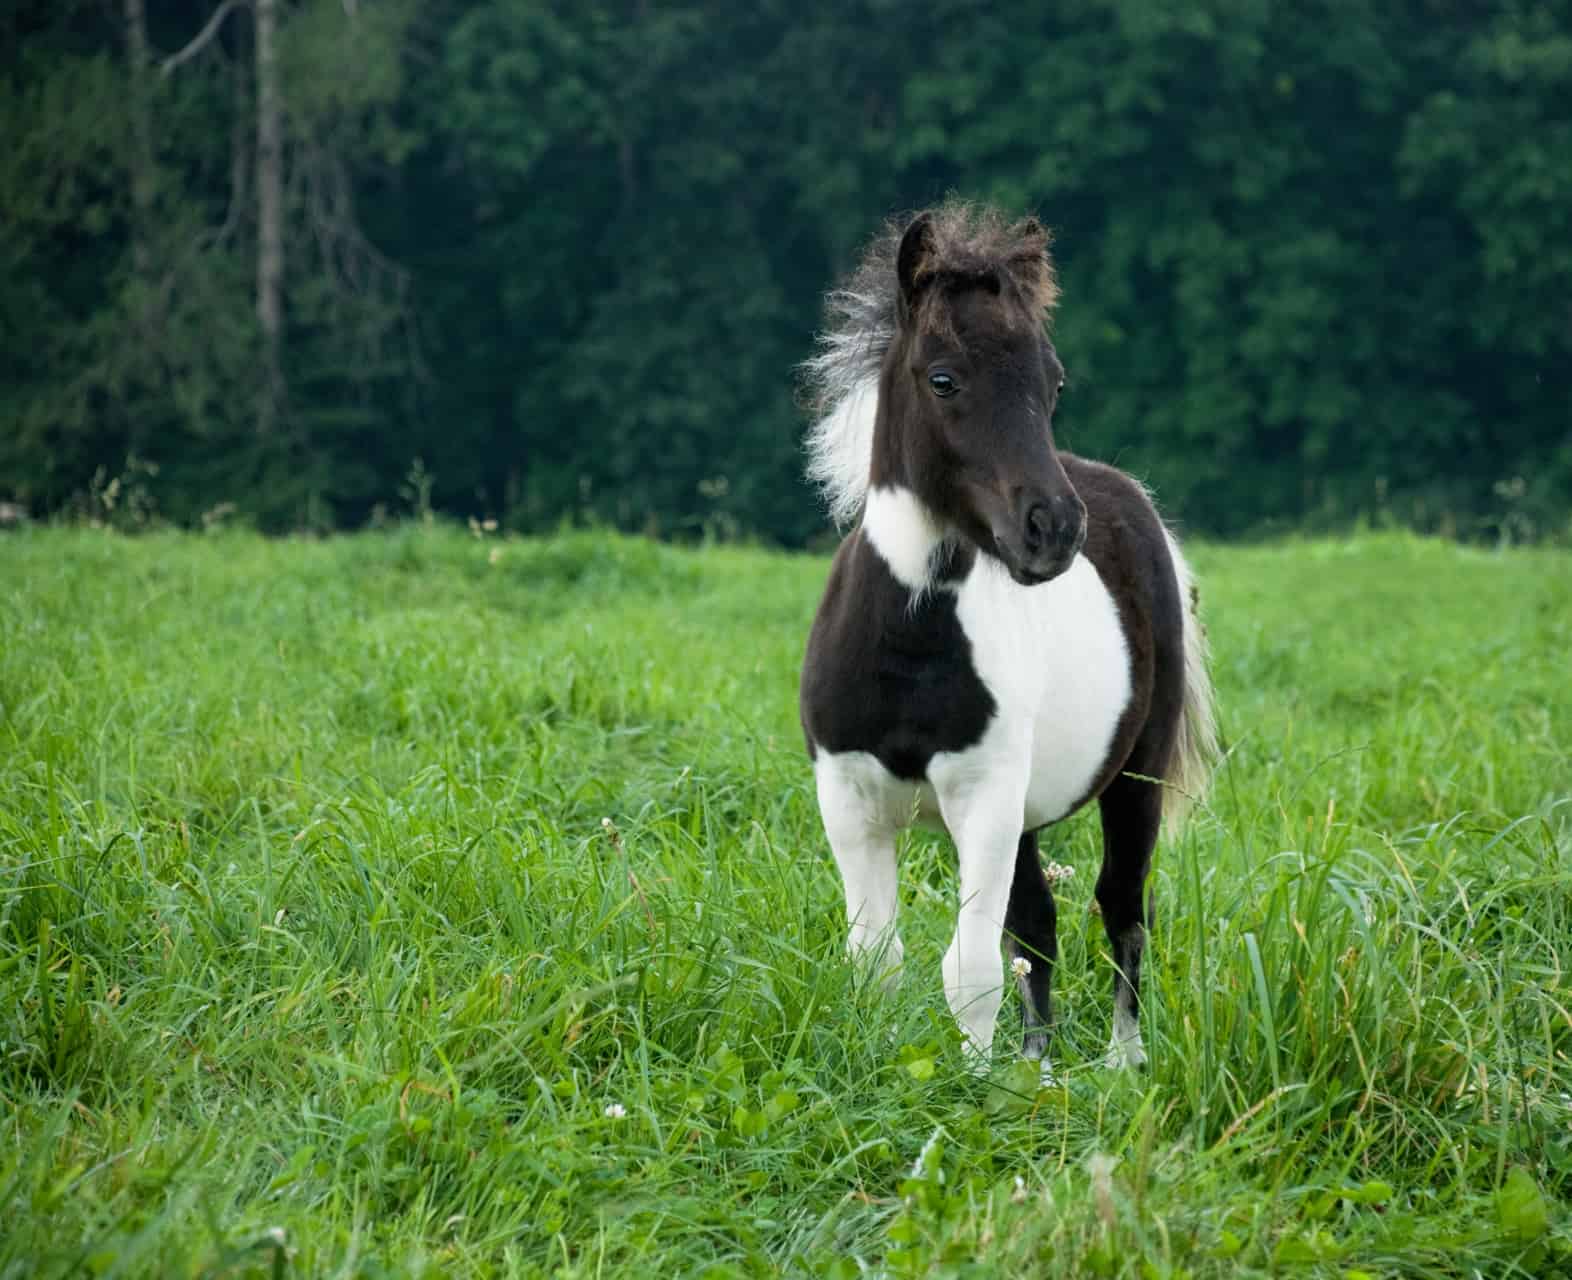 These Adorable Images Of Mini Horses Confirm Once Again That They're ...